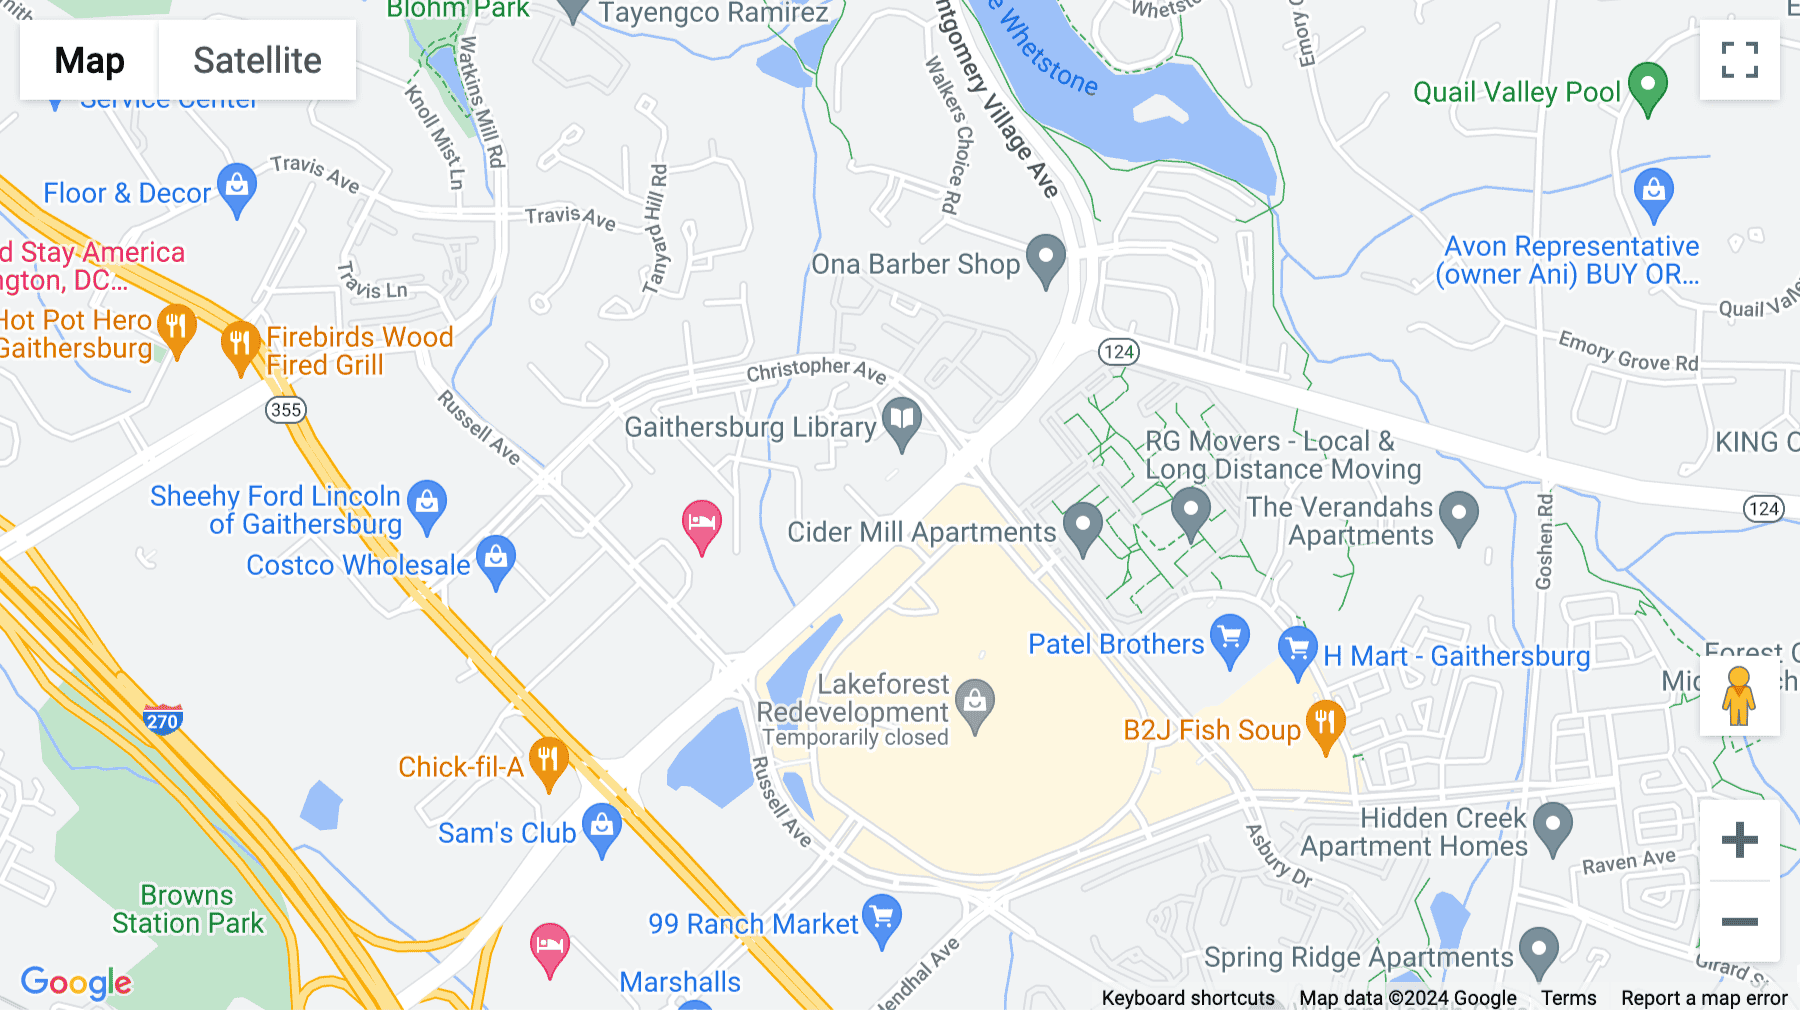 Click for interative map of 18310 Montgomery Village Avenue, Suite 300, Gaithersburg